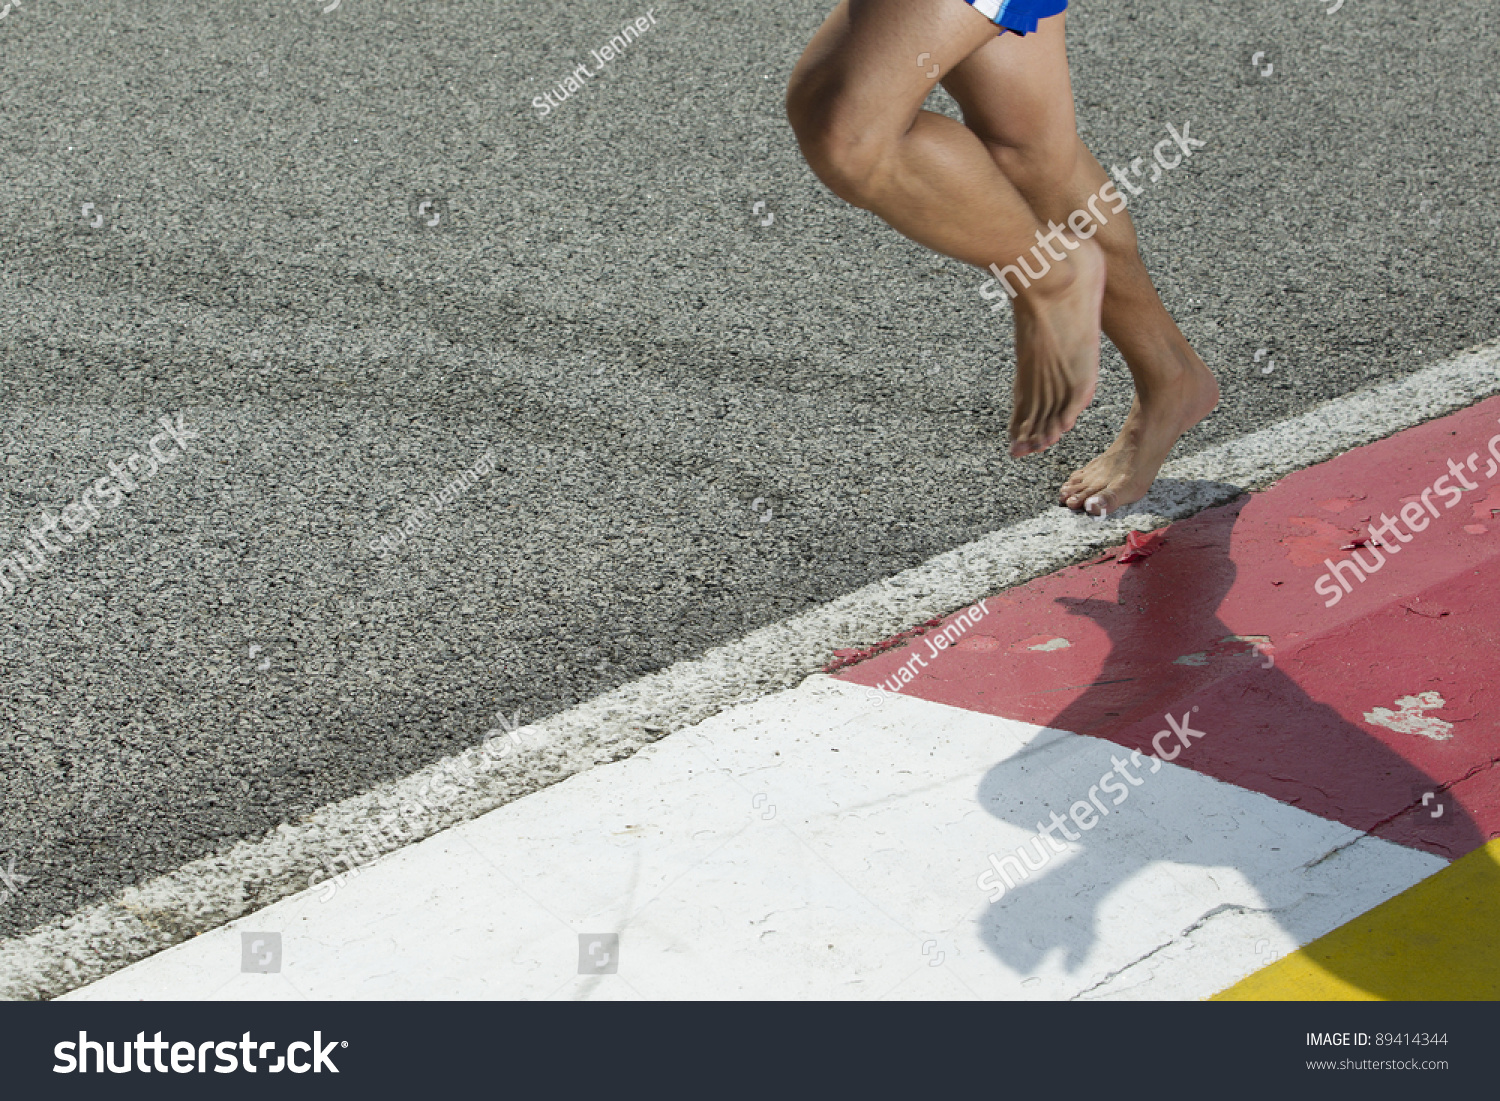 A Closeup Of A Runners Feet While Barefoot Running On A Track Stock Photo Shutterstock